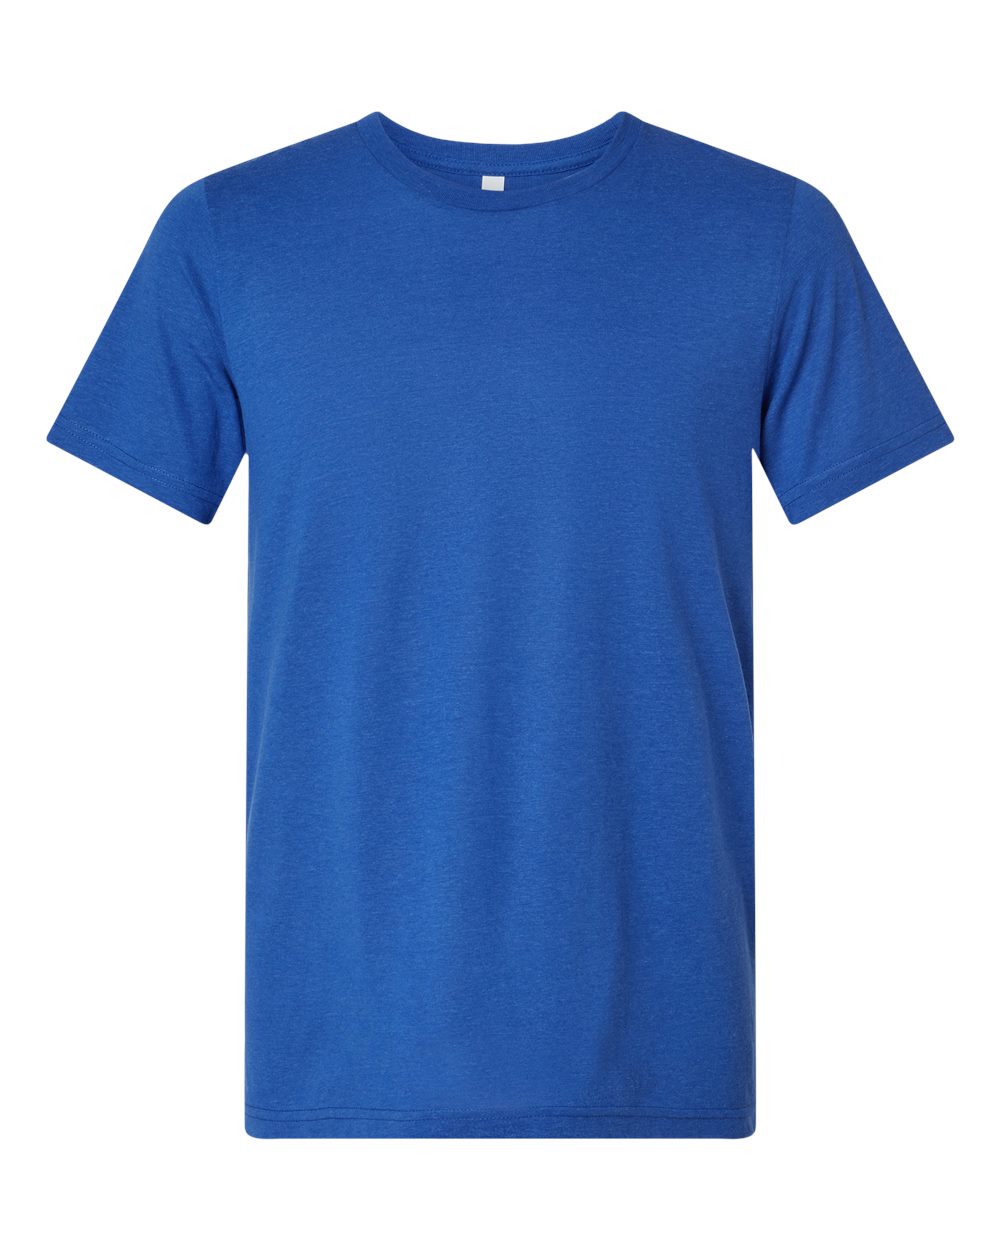 Bella + Canvas Triblend Tee (3413) in Solid True Royal Triblend